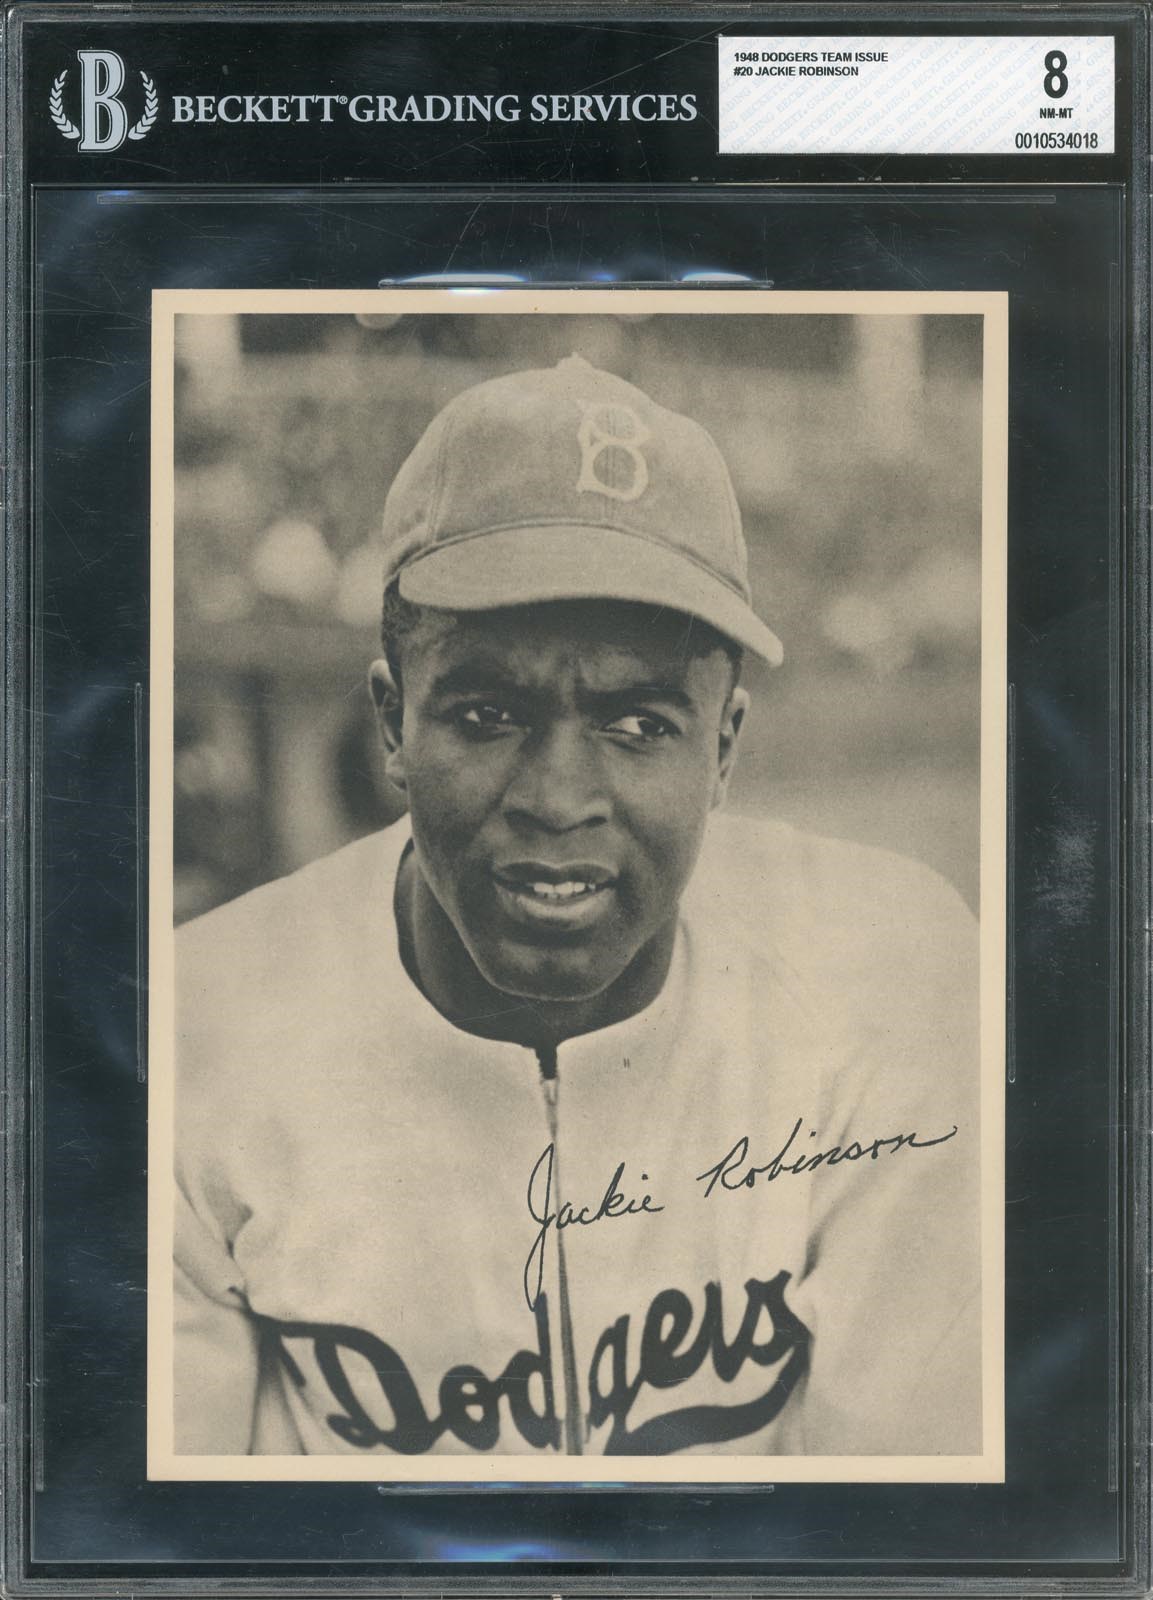 - 1948 Dodgers Team Issue #20 Jackie Robinson BGS NM-MT 8 (POP 1 Highest Graded)